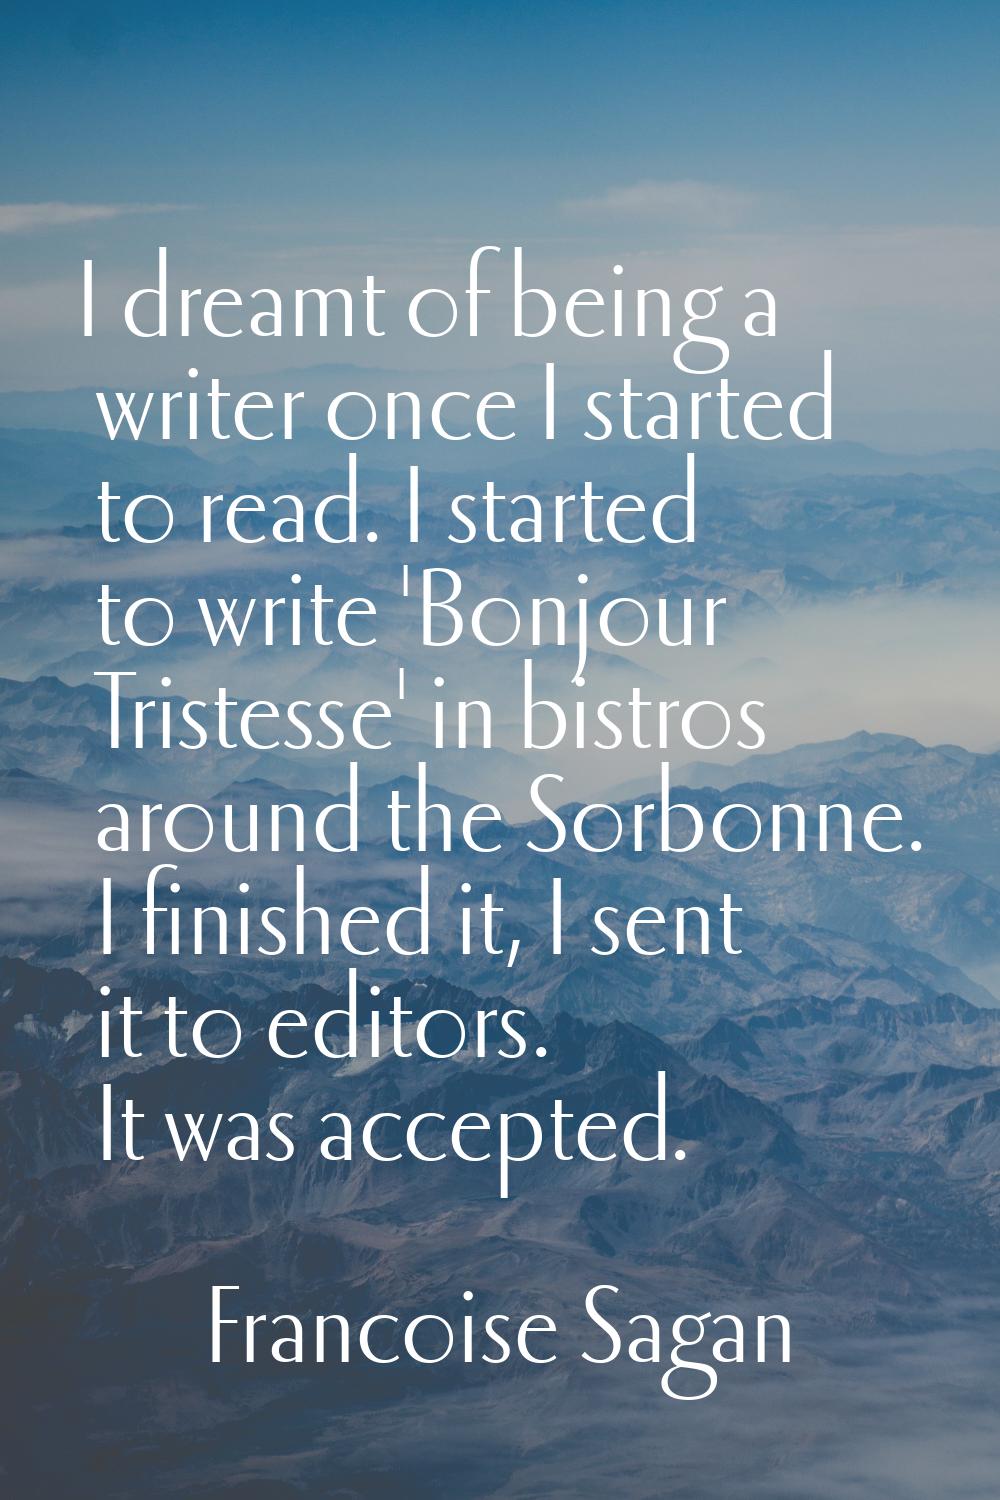 I dreamt of being a writer once I started to read. I started to write 'Bonjour Tristesse' in bistro